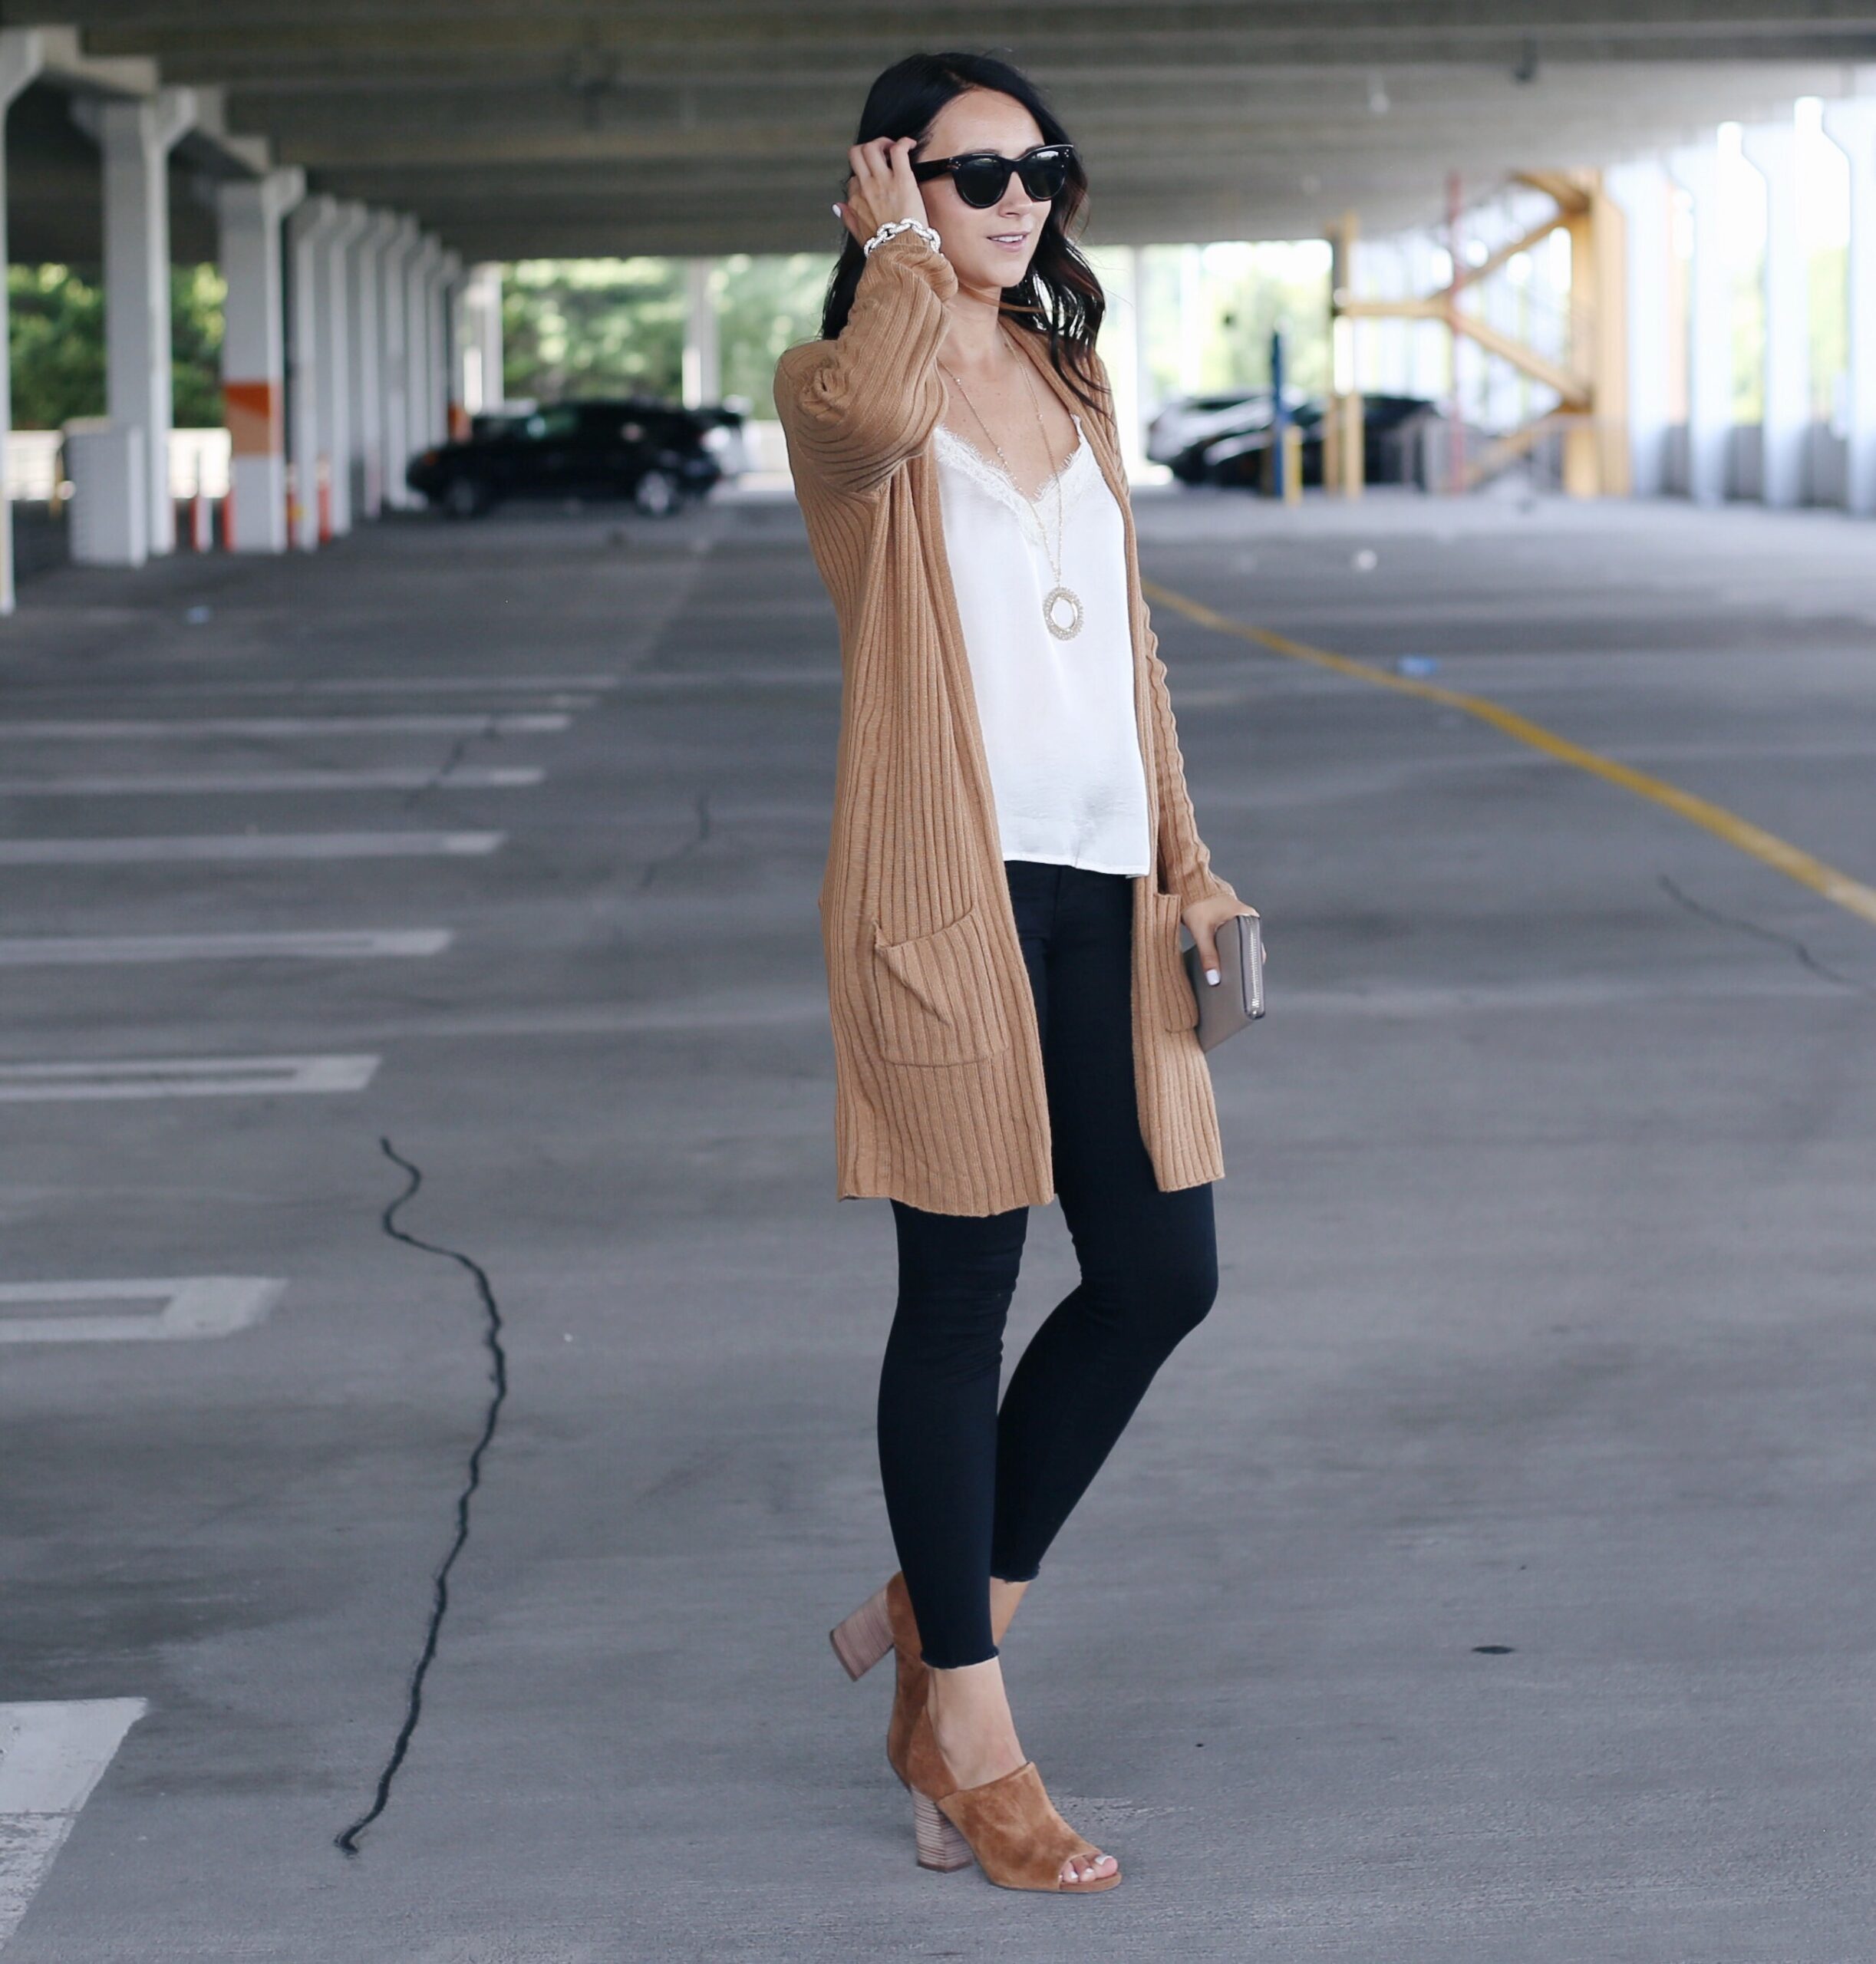 FASHION BLOGGER ANNA MONTEIRO OF BLUSHING ROSE STYLE WEARING BP. RIBBED CARDIGAN FROM NORDSTROM ANNIVERSARY SALE 2017